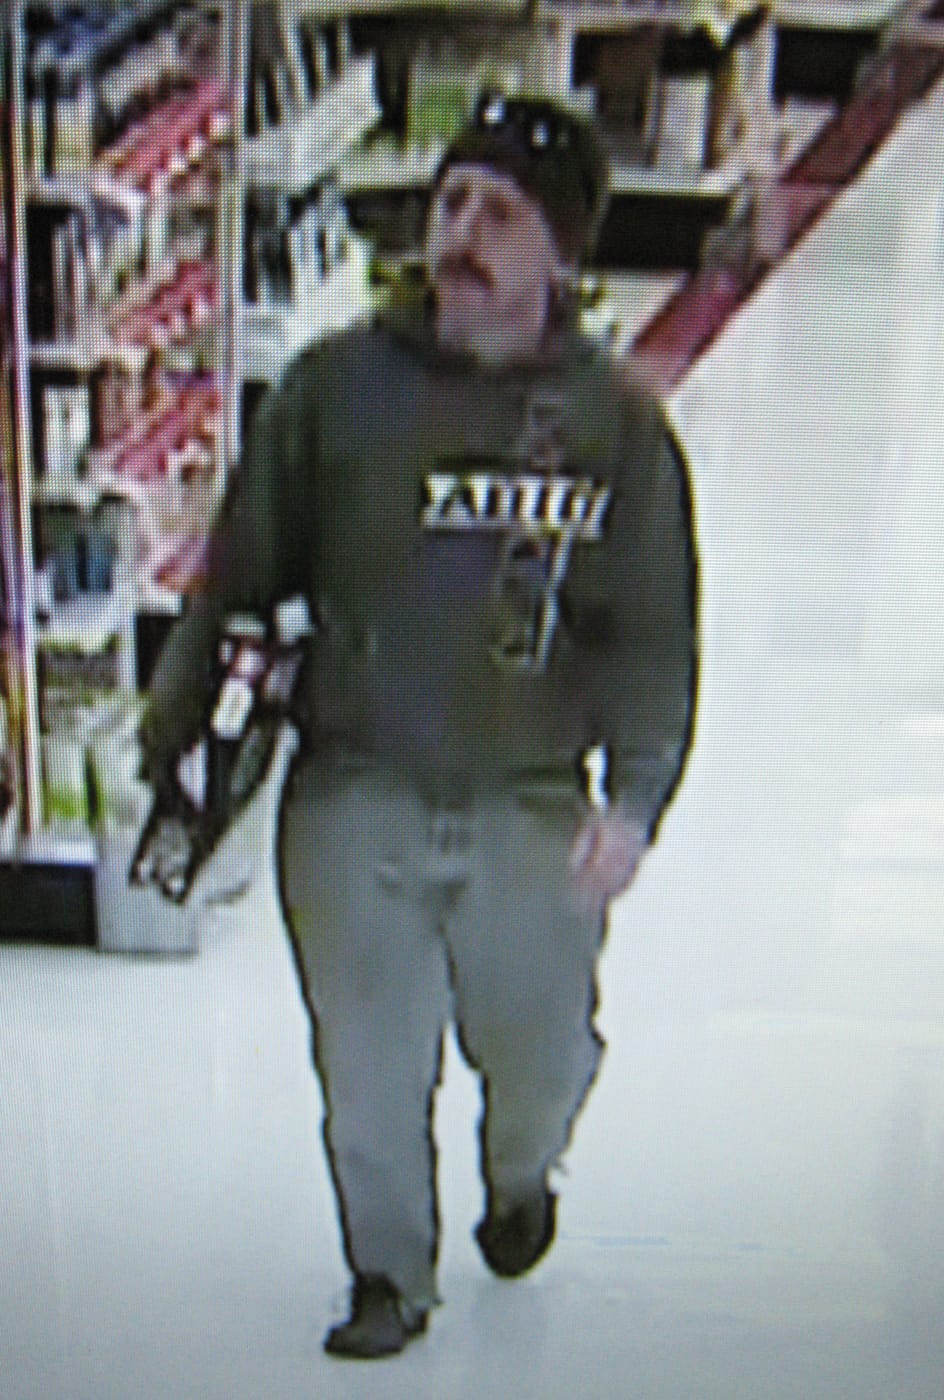 Police are looking for this man, who allegedly stole a woman's wallet while she was shopping at WinCo Foods in Brush Prairie and used her credit card to make fraudulent purchases.